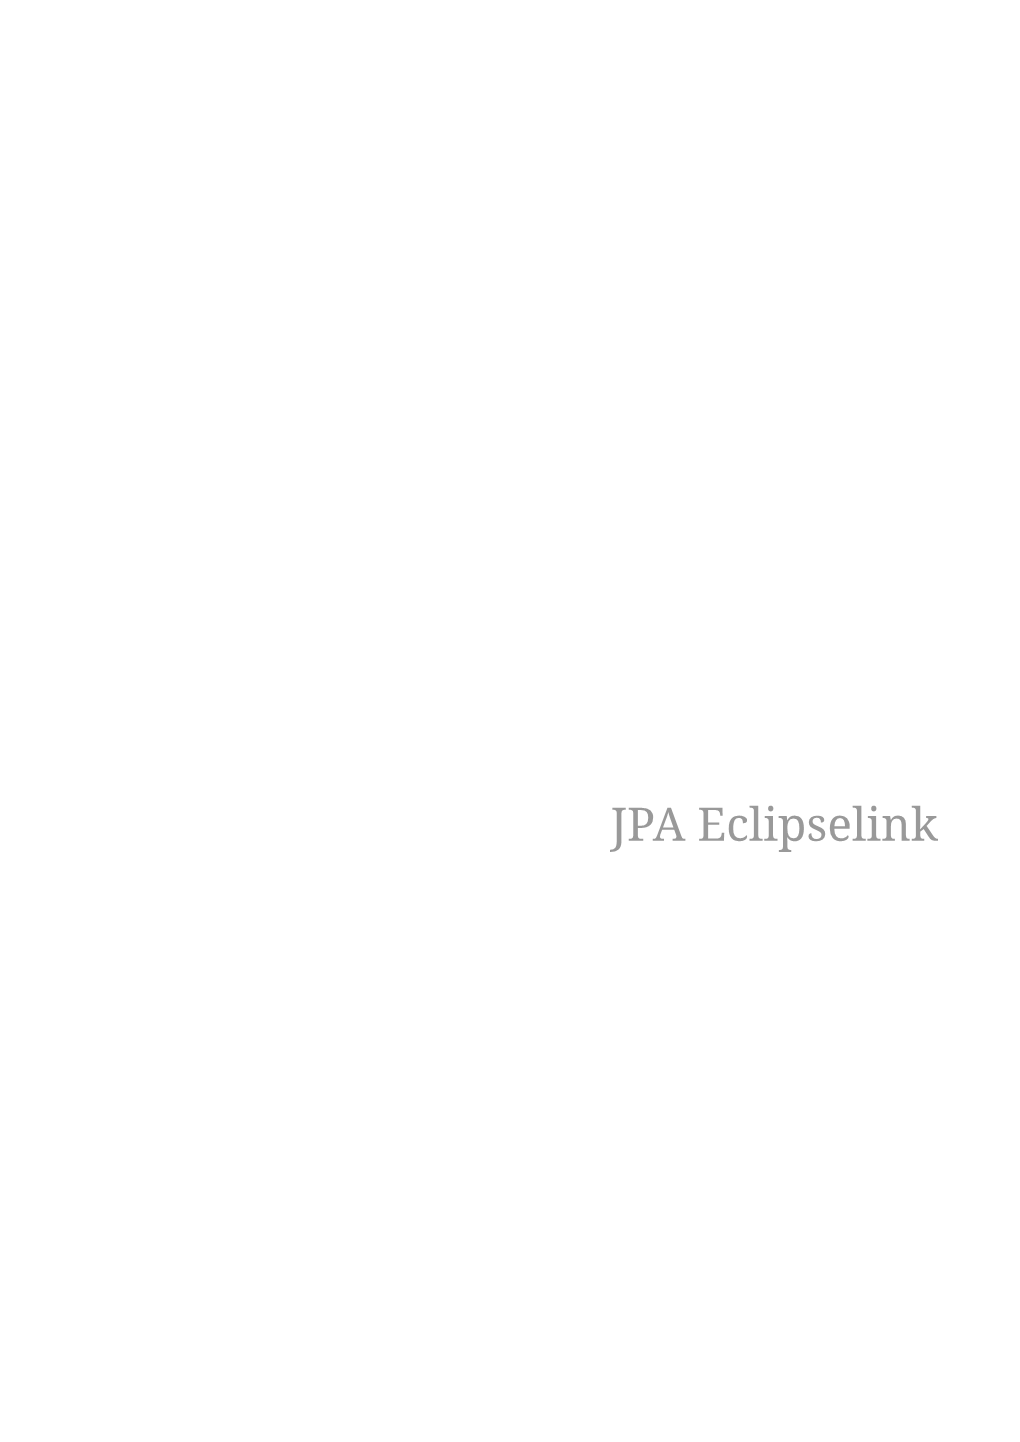 JPA Eclipselink Example Jpa-Eclipselink Can Be Browsed At